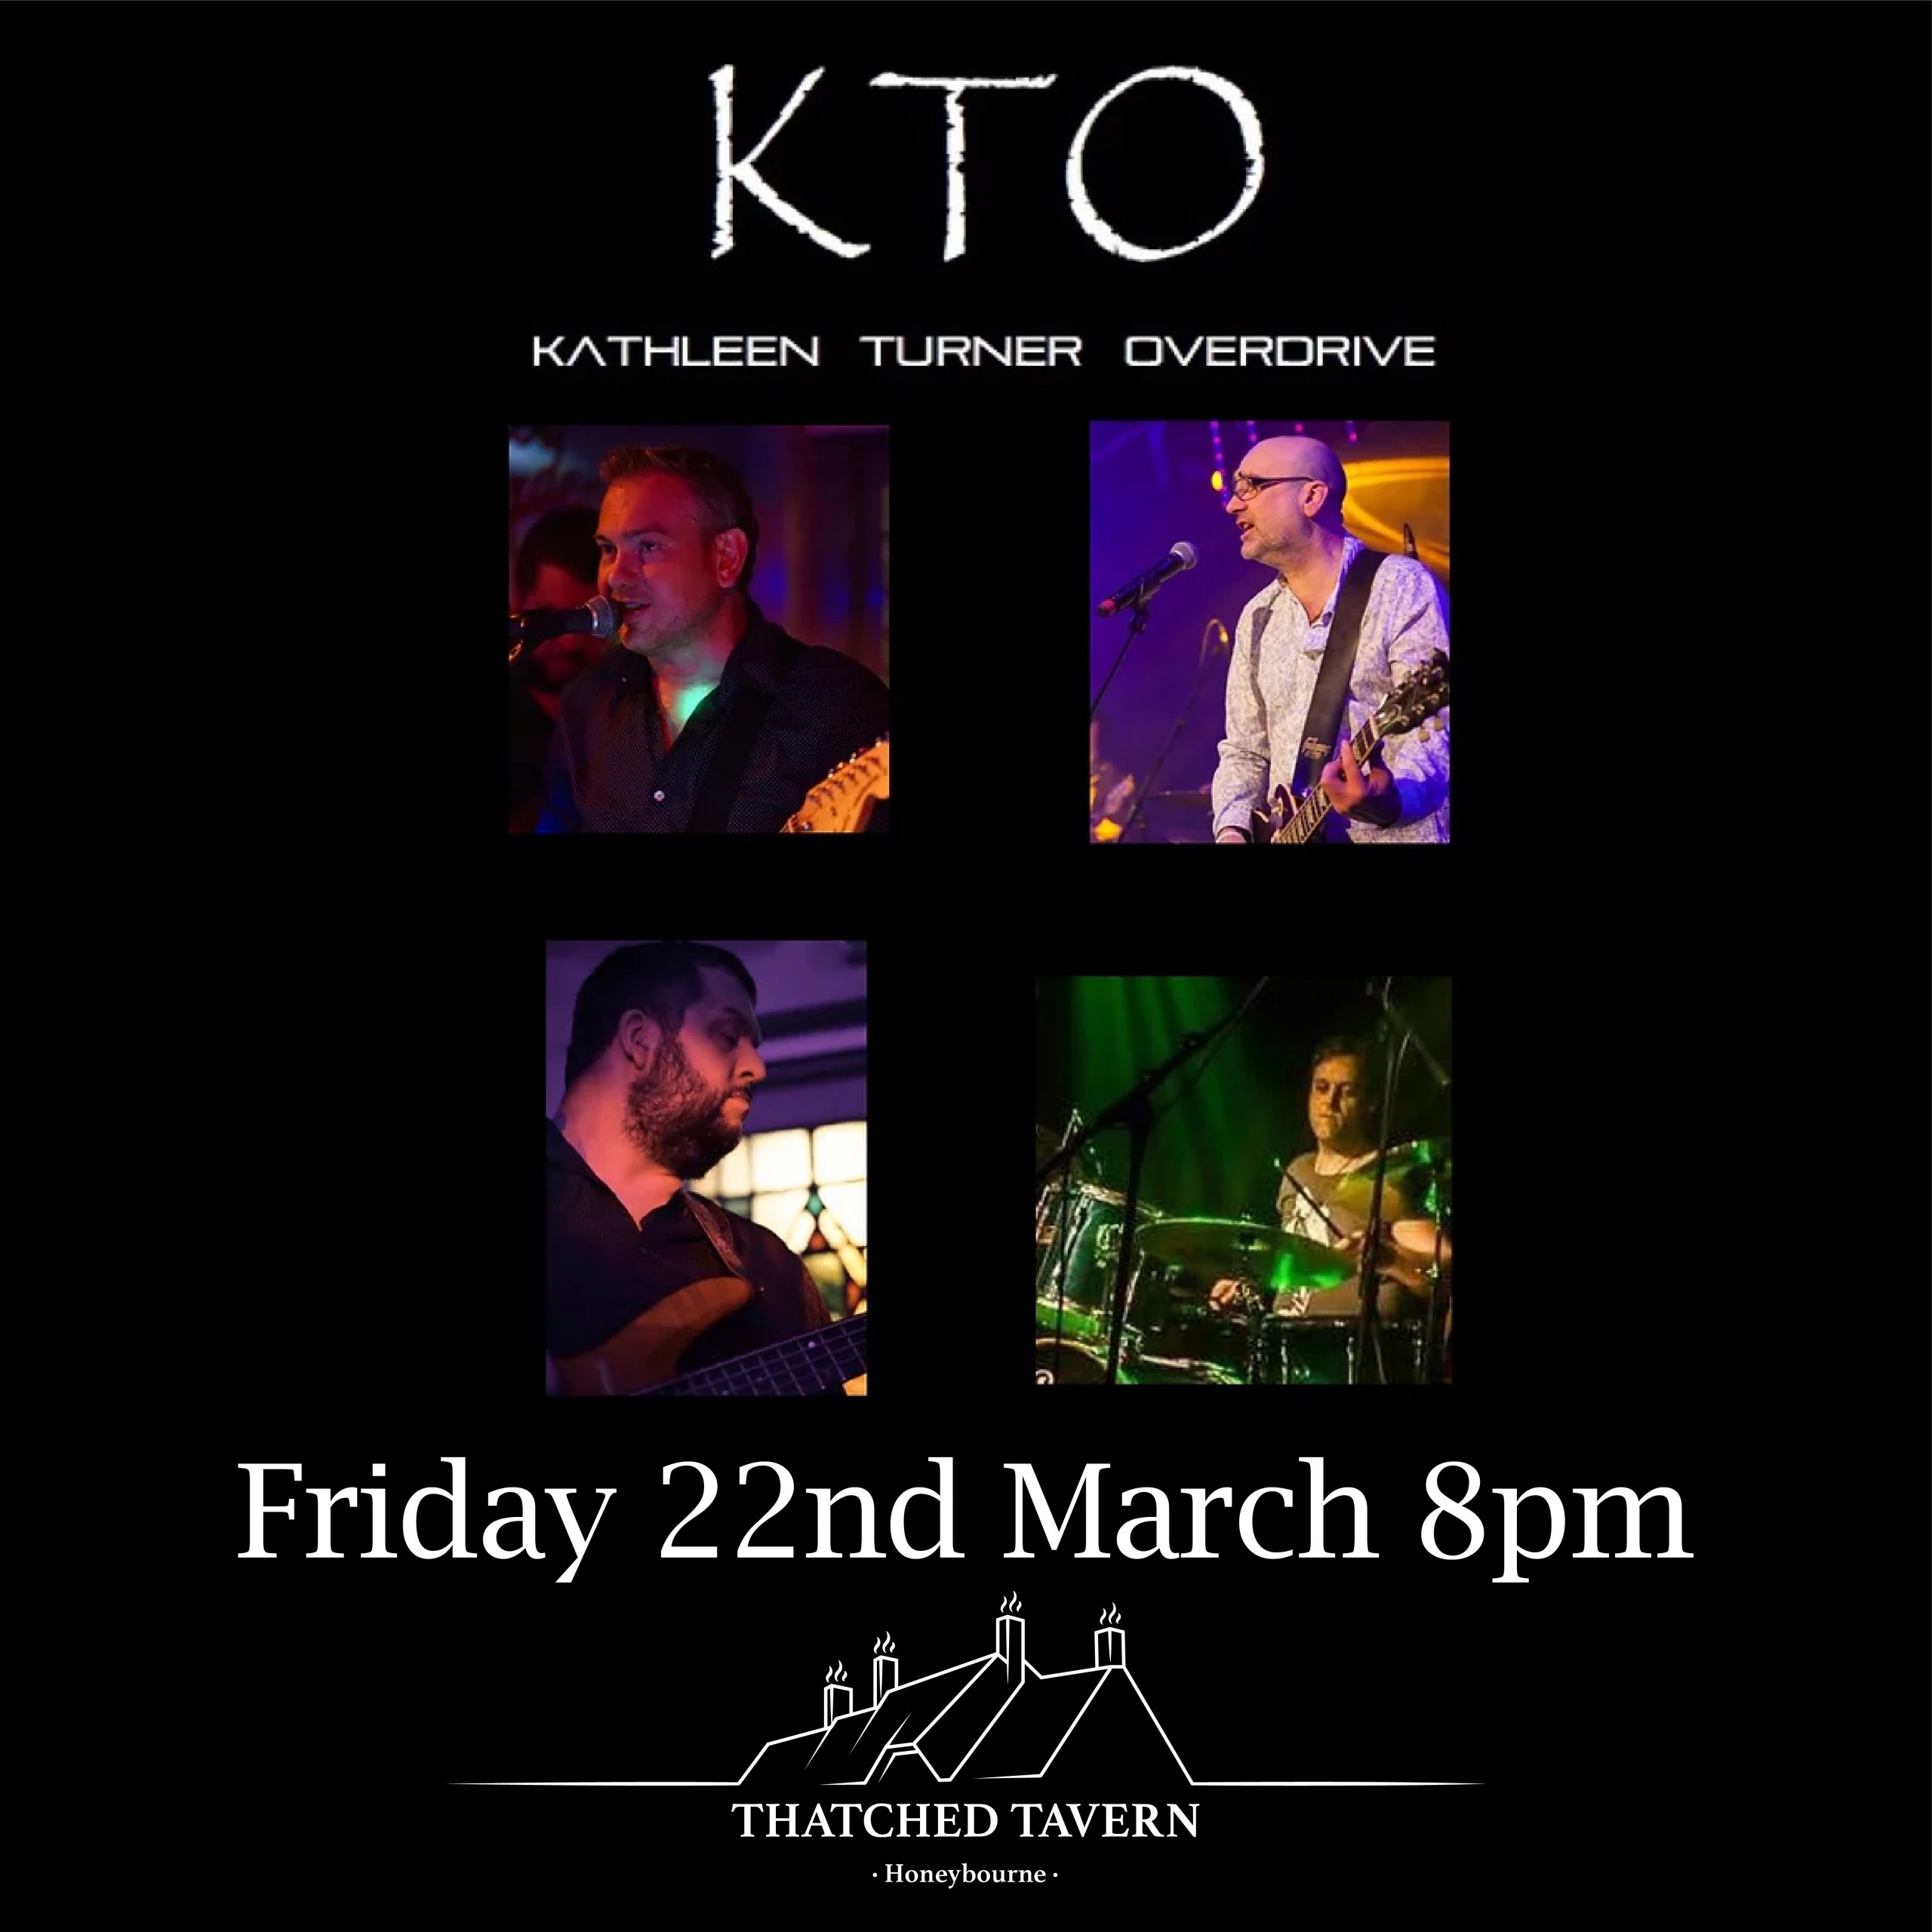 Live Music by KTO at The Thatch – Friday 22nd March from 8pm